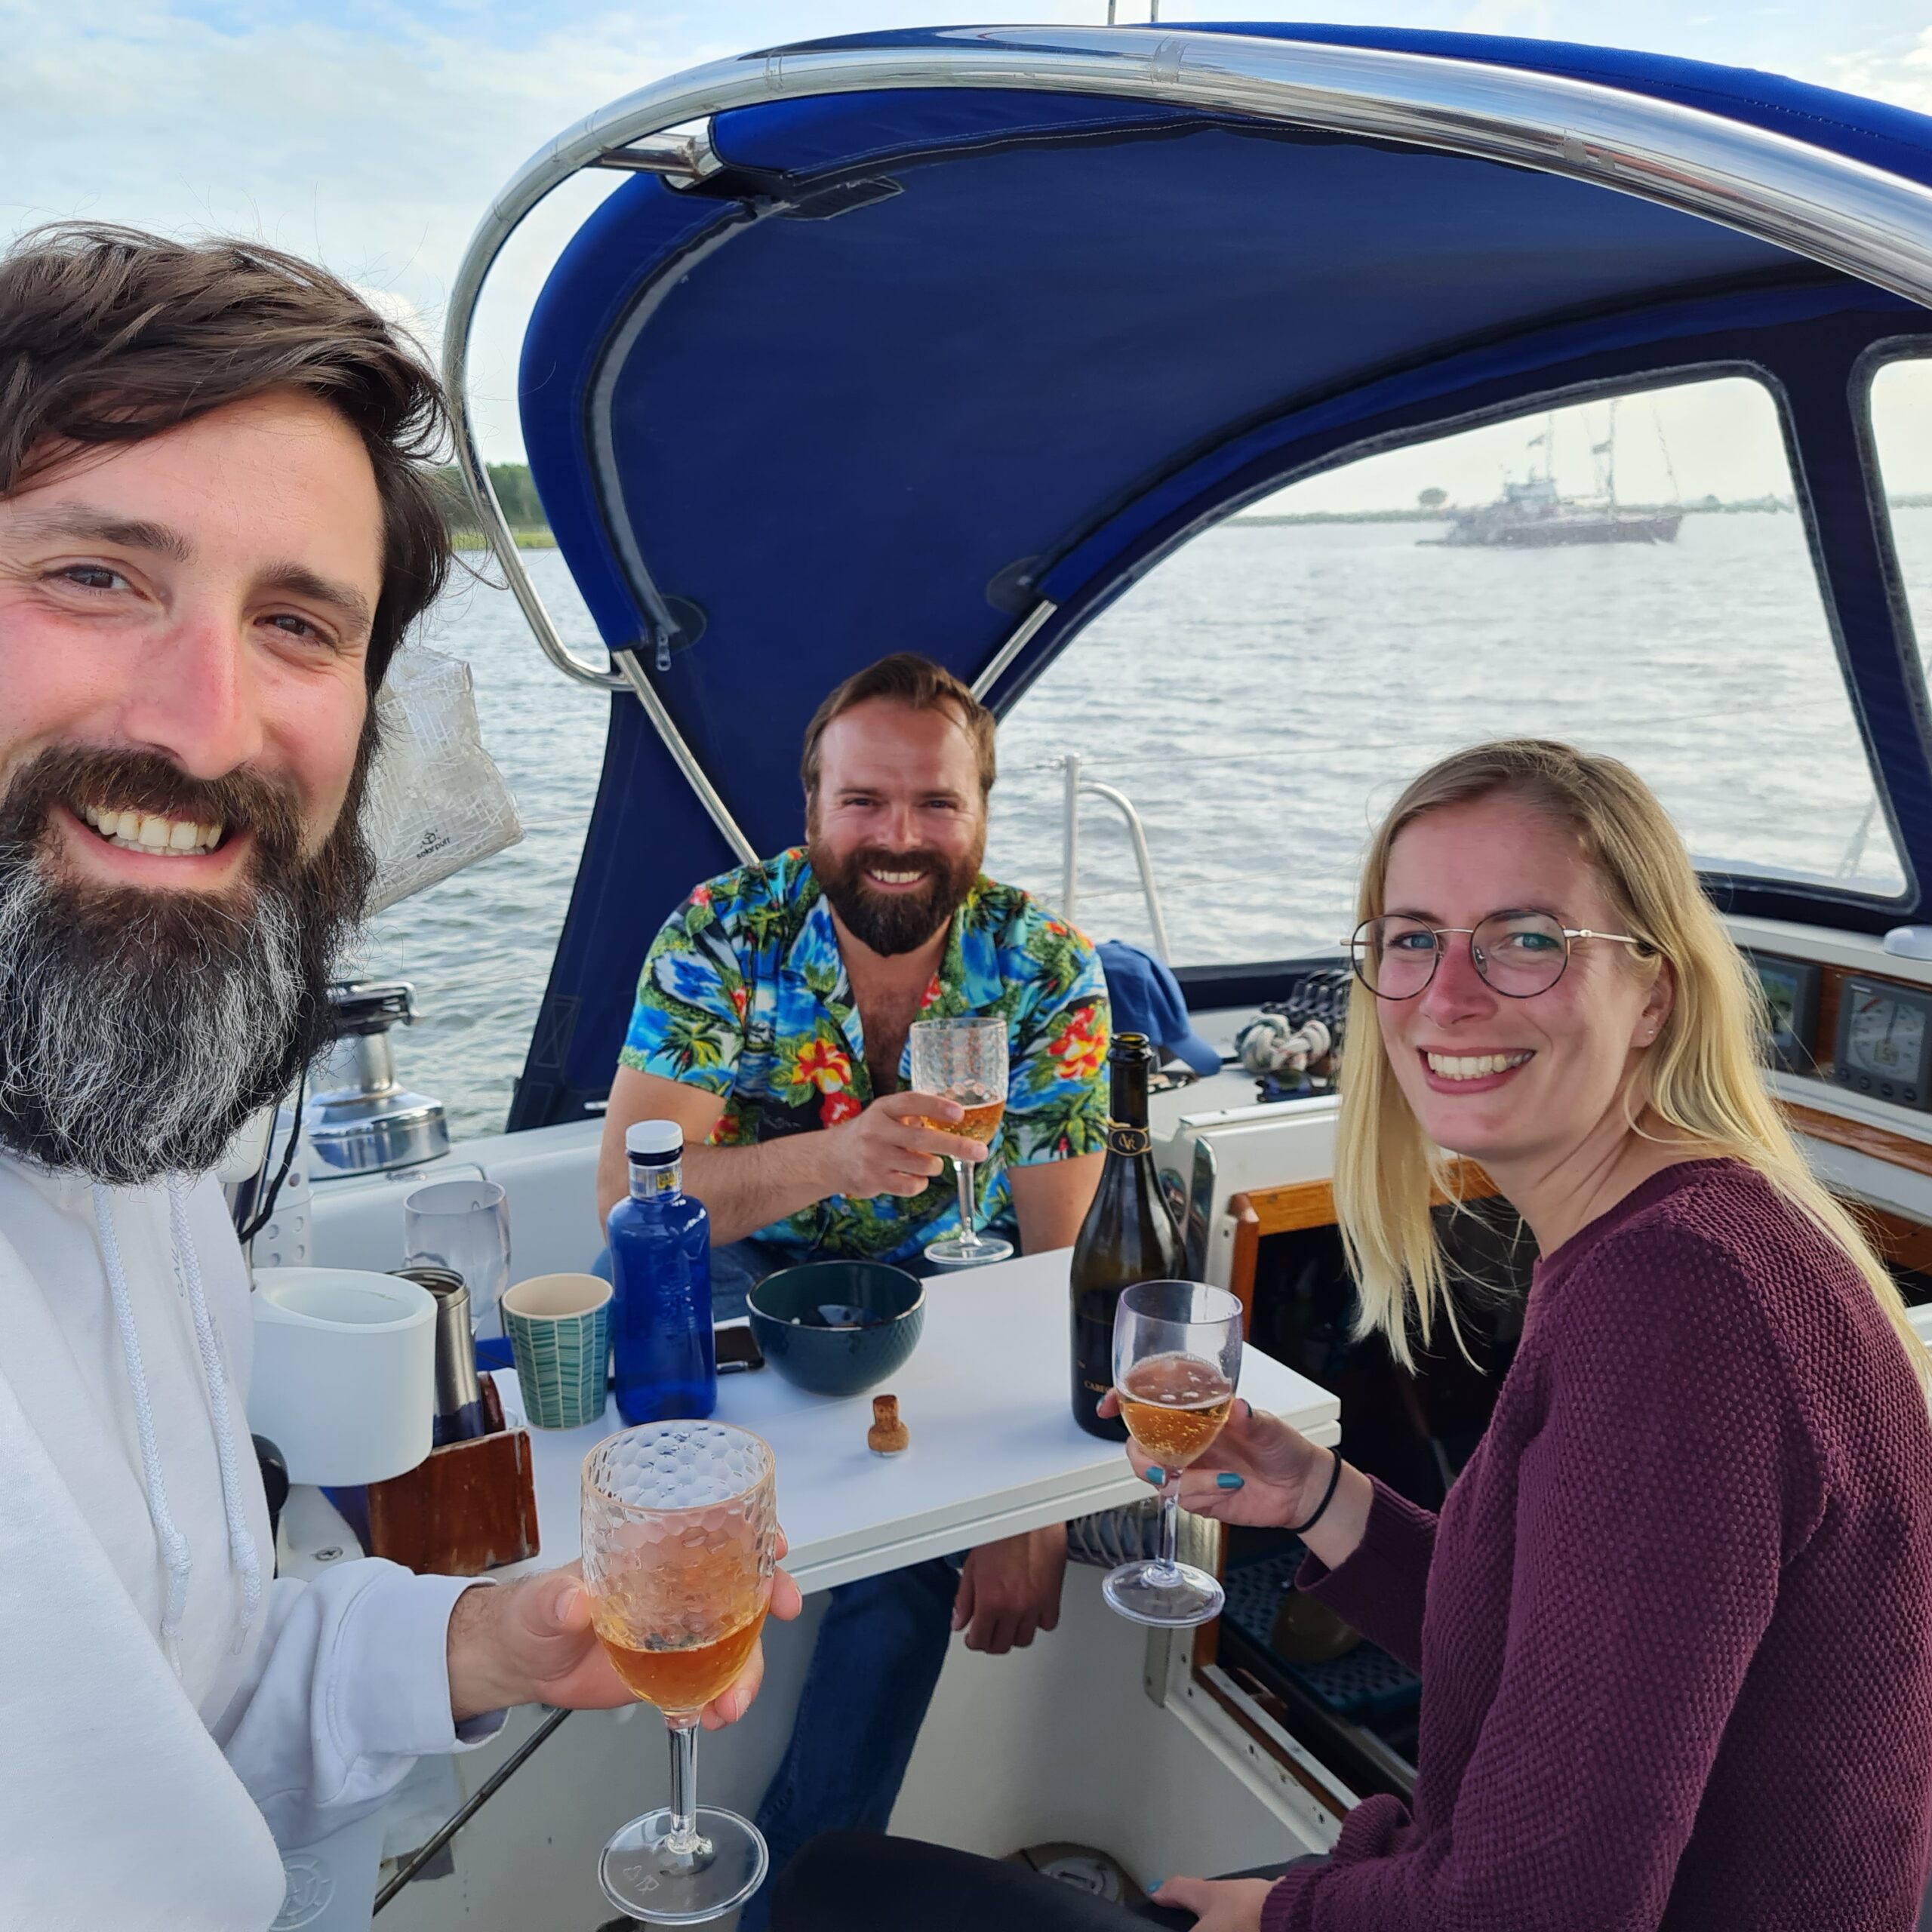 Joyful group of friends enjoying a toast on a sailboat at Markermeer during golden hour